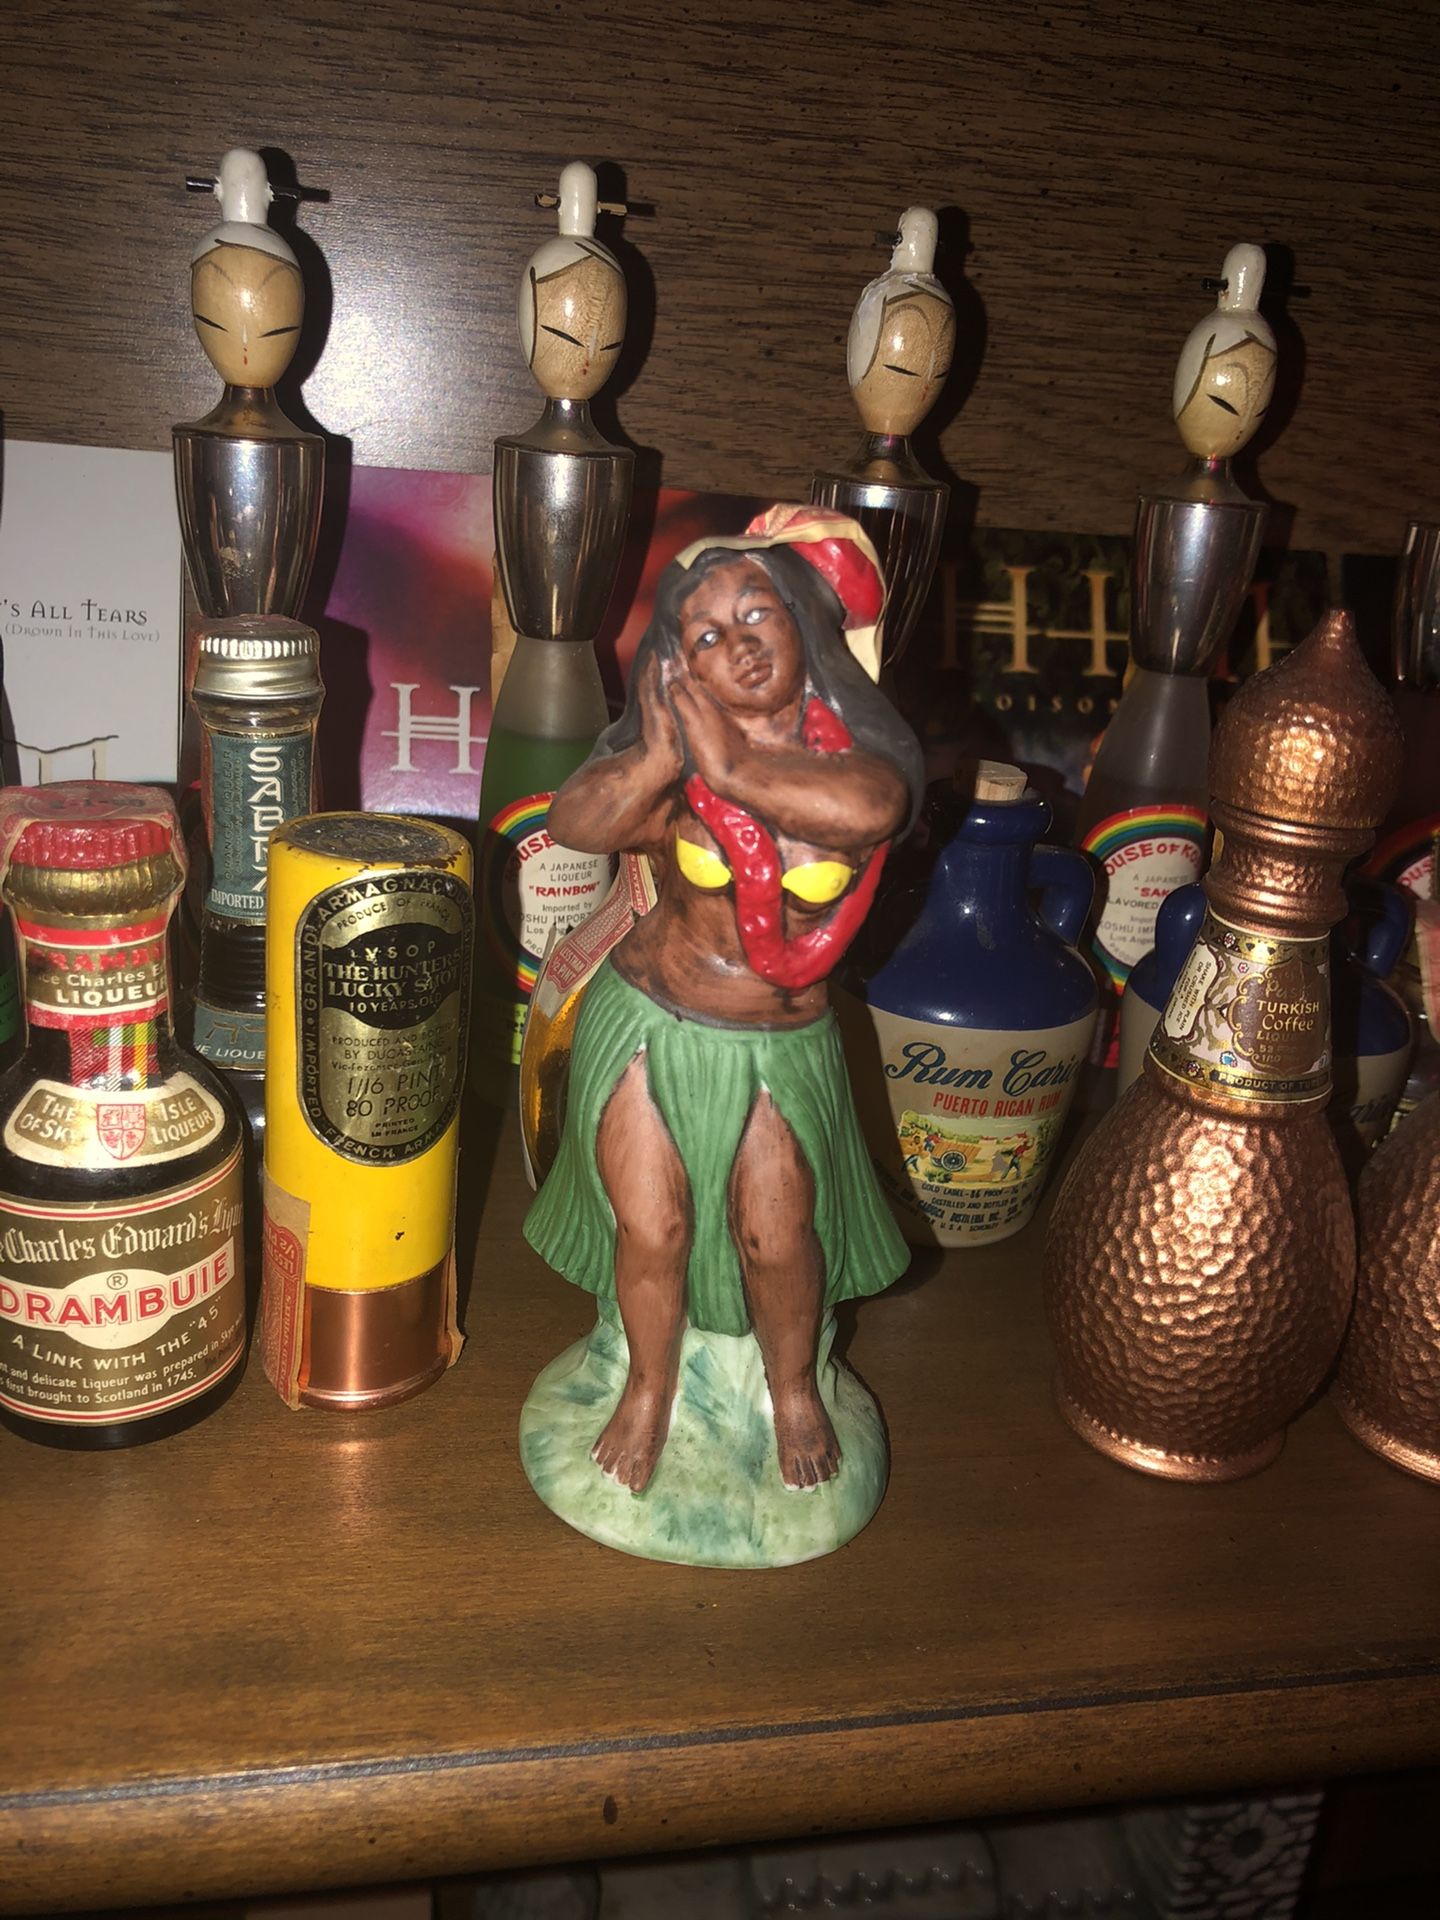 (Lowered price) Very Rare Vintage Hawaiian Airline Bottle (only 1 other found online)